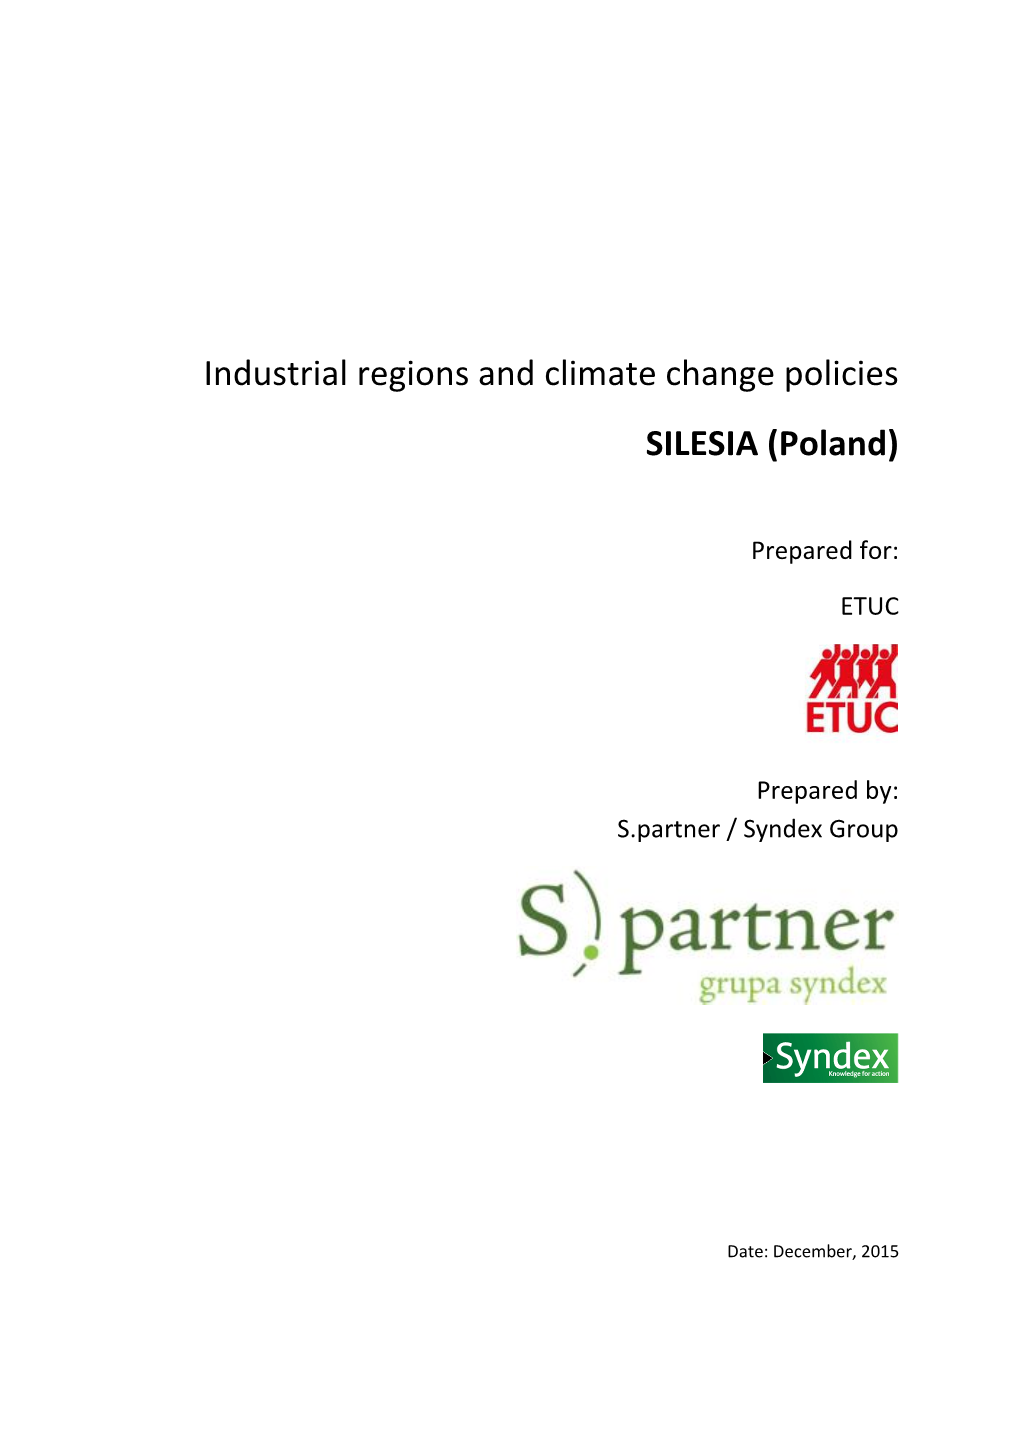 Industrial Regions and Climate Change Policies SILESIA (Poland)